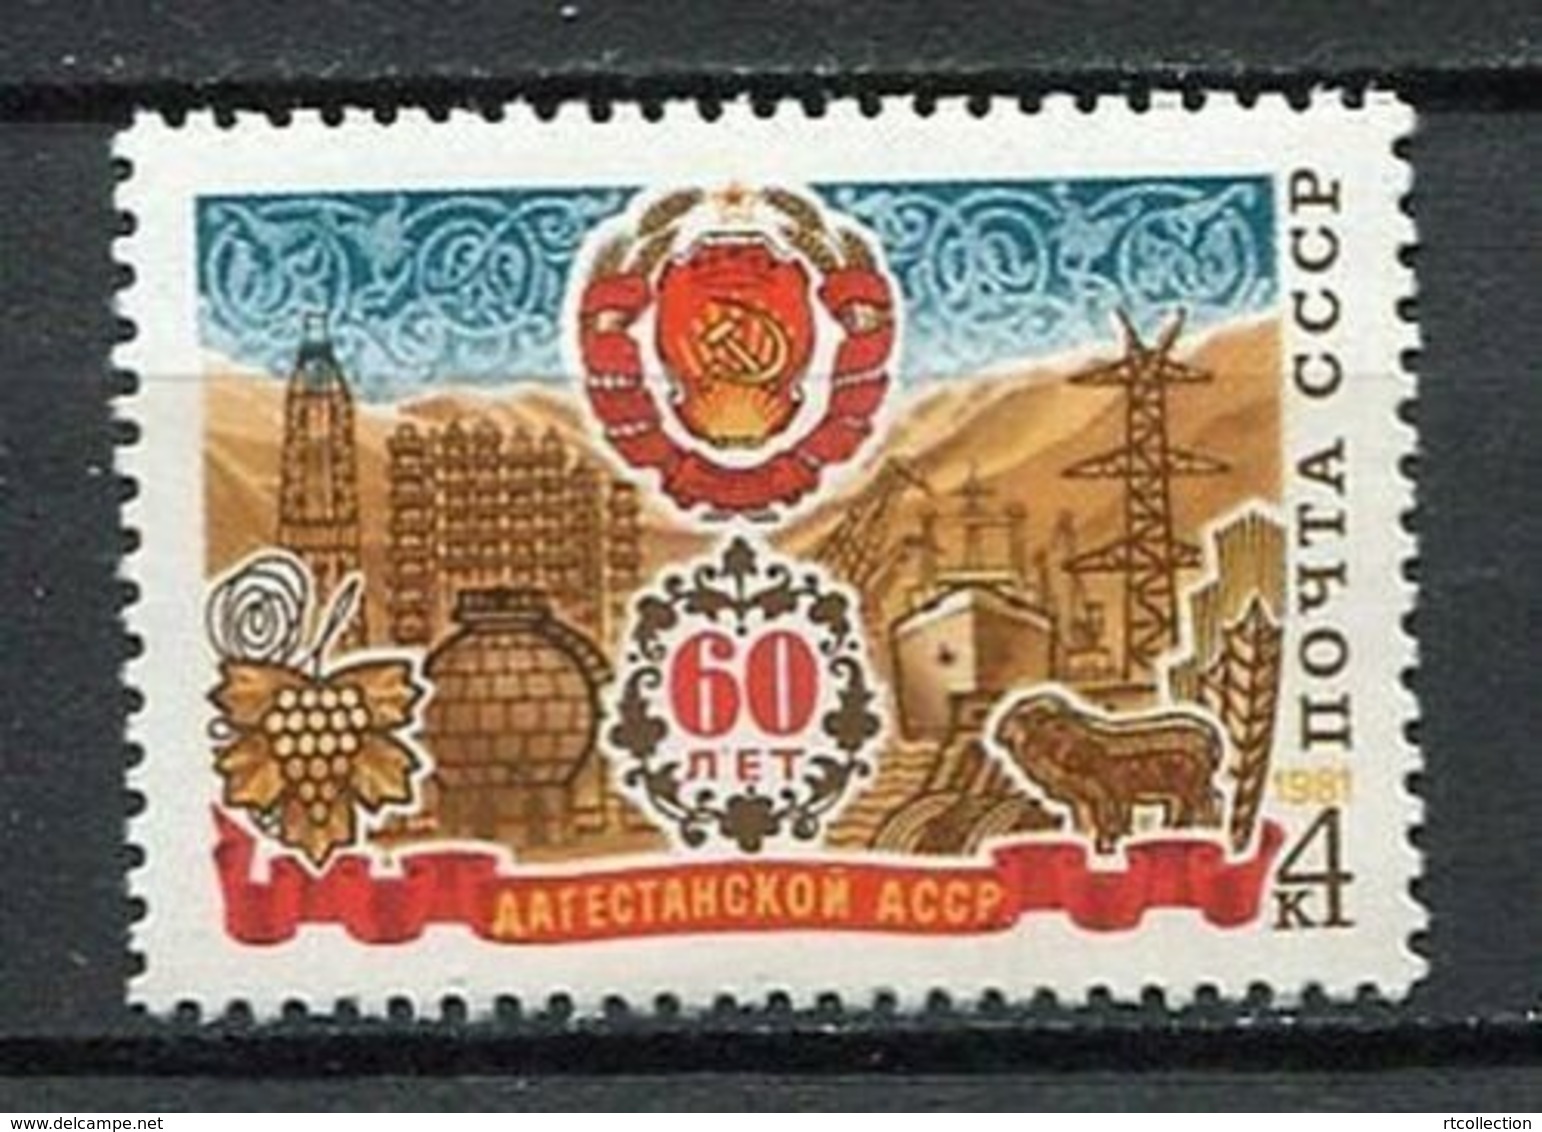 USSR Russia 1981 60th Anniversary Dagestan ASSR Celebrations Places Geography Symbols Coat Of Arms Stamp MNH Michel 5031 - Geography